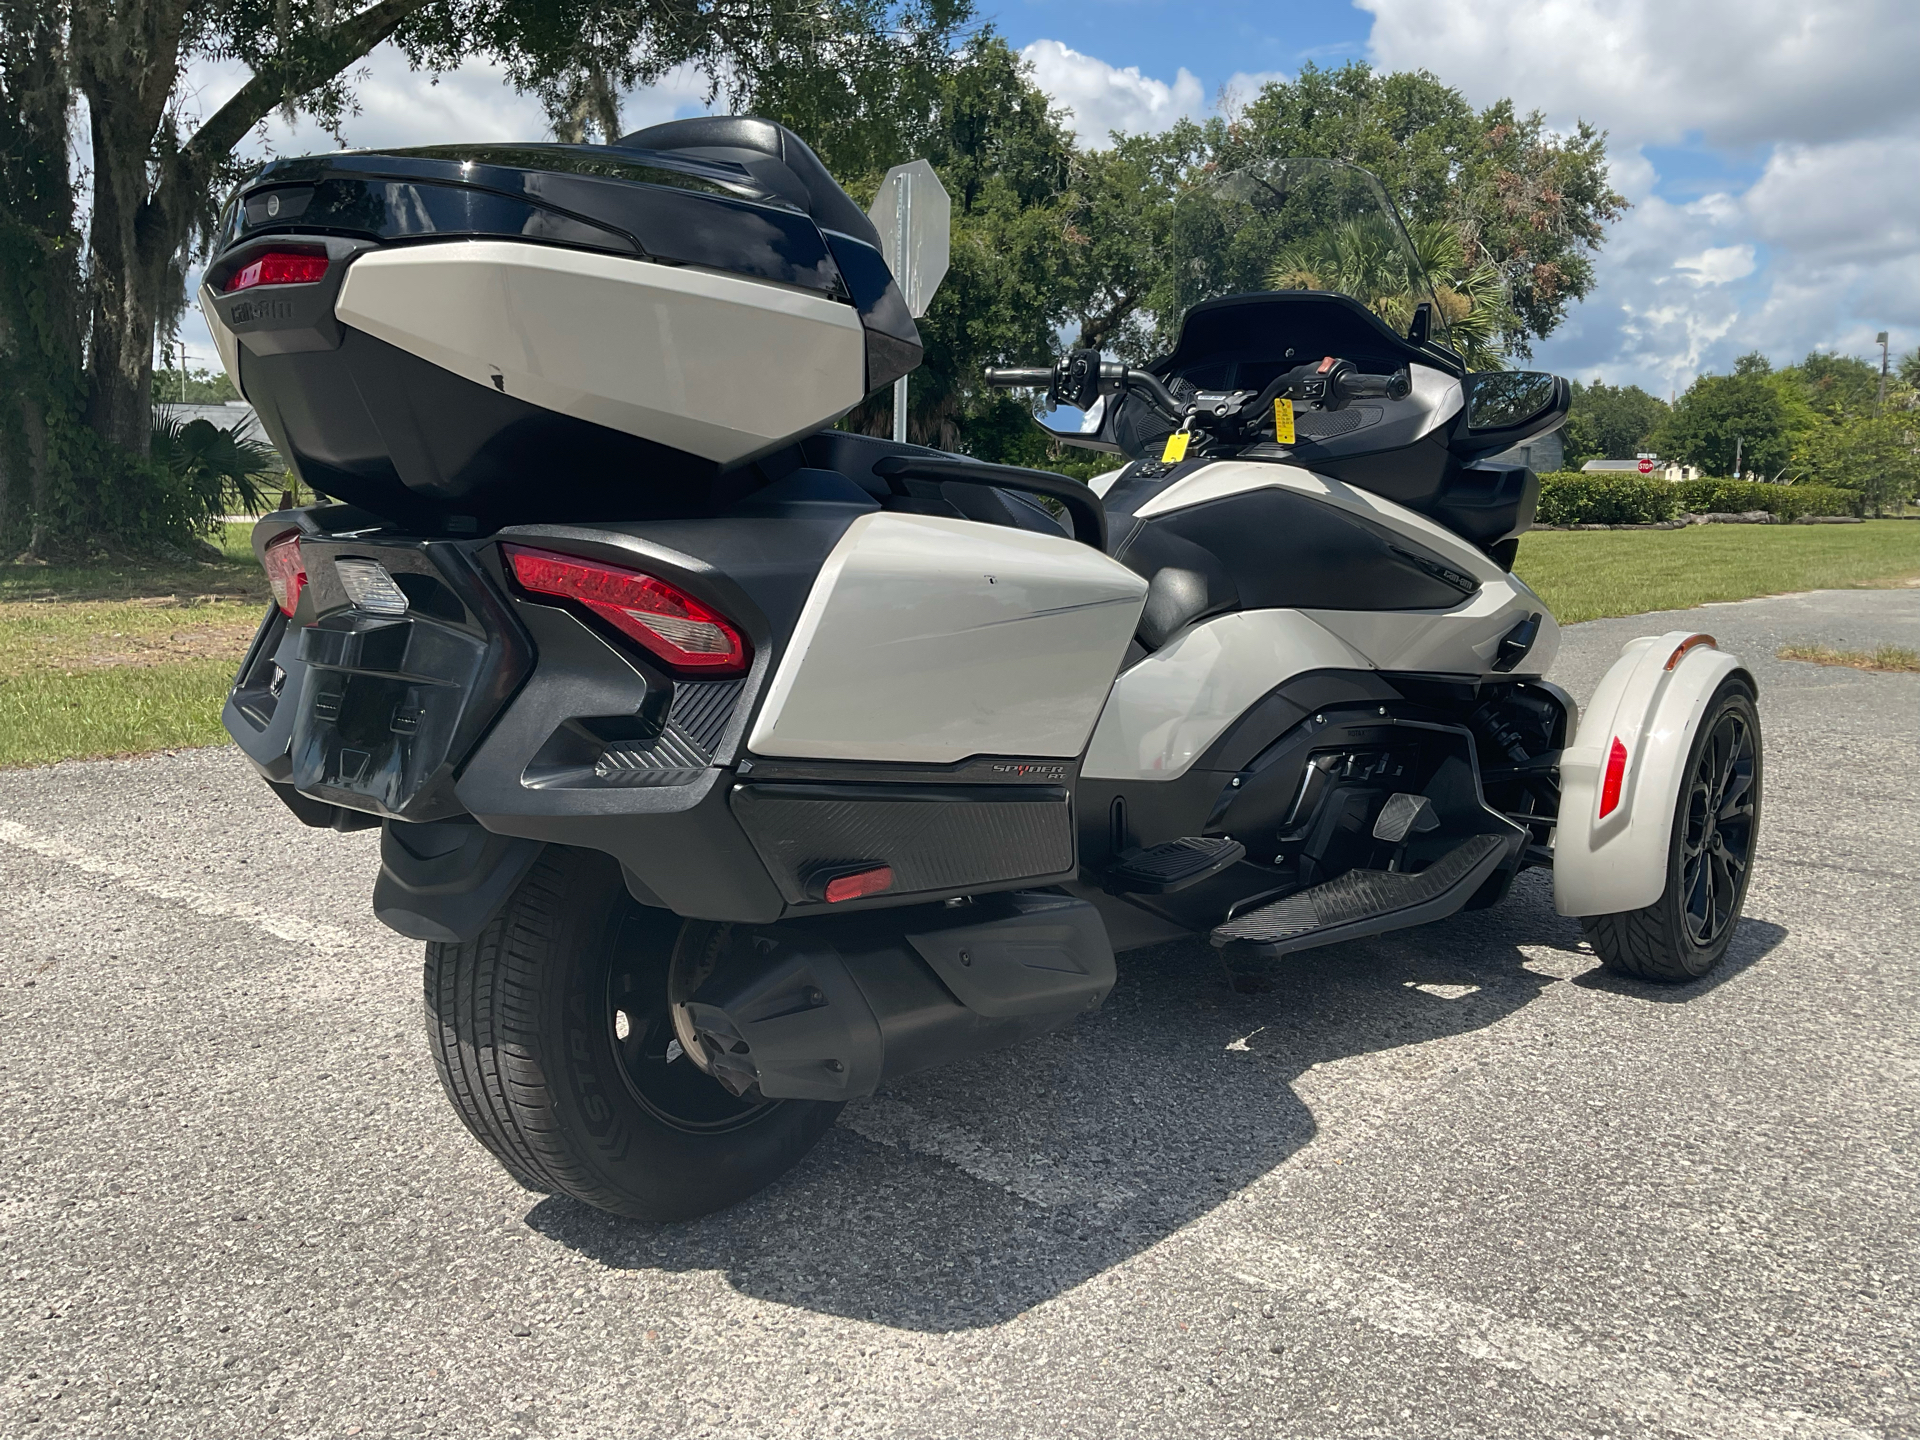 2020 Can-Am Spyder RT Limited in Sanford, Florida - Photo 10